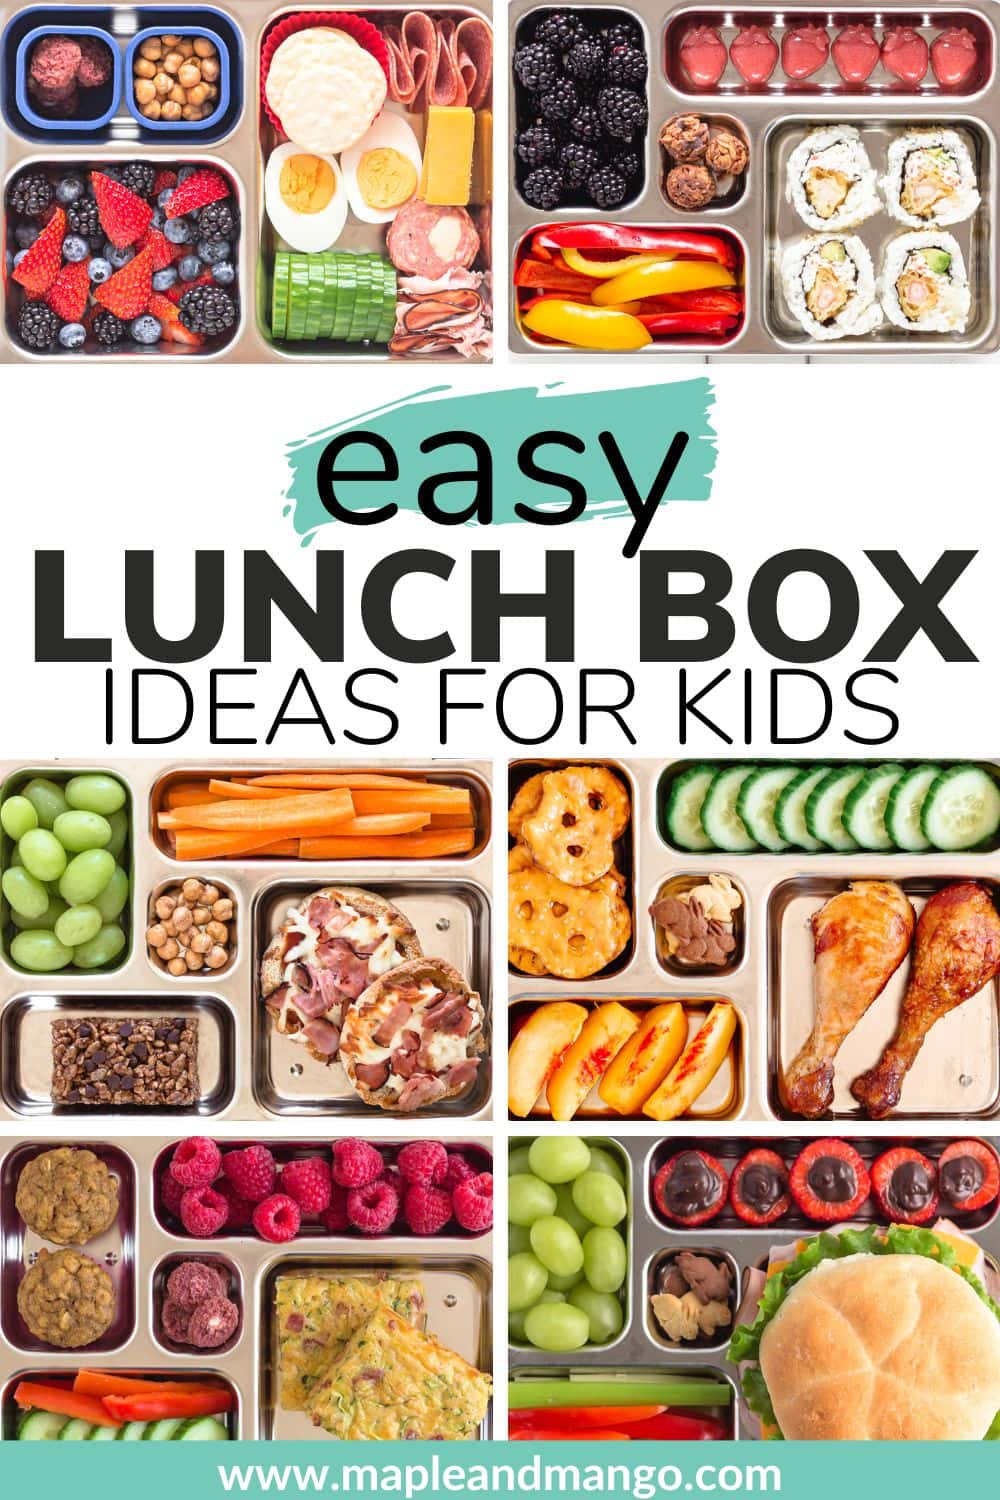 Photo collage graphic showing different packed lunch boxes with text overlay "Easy Lunch Box Ideas For Kids".